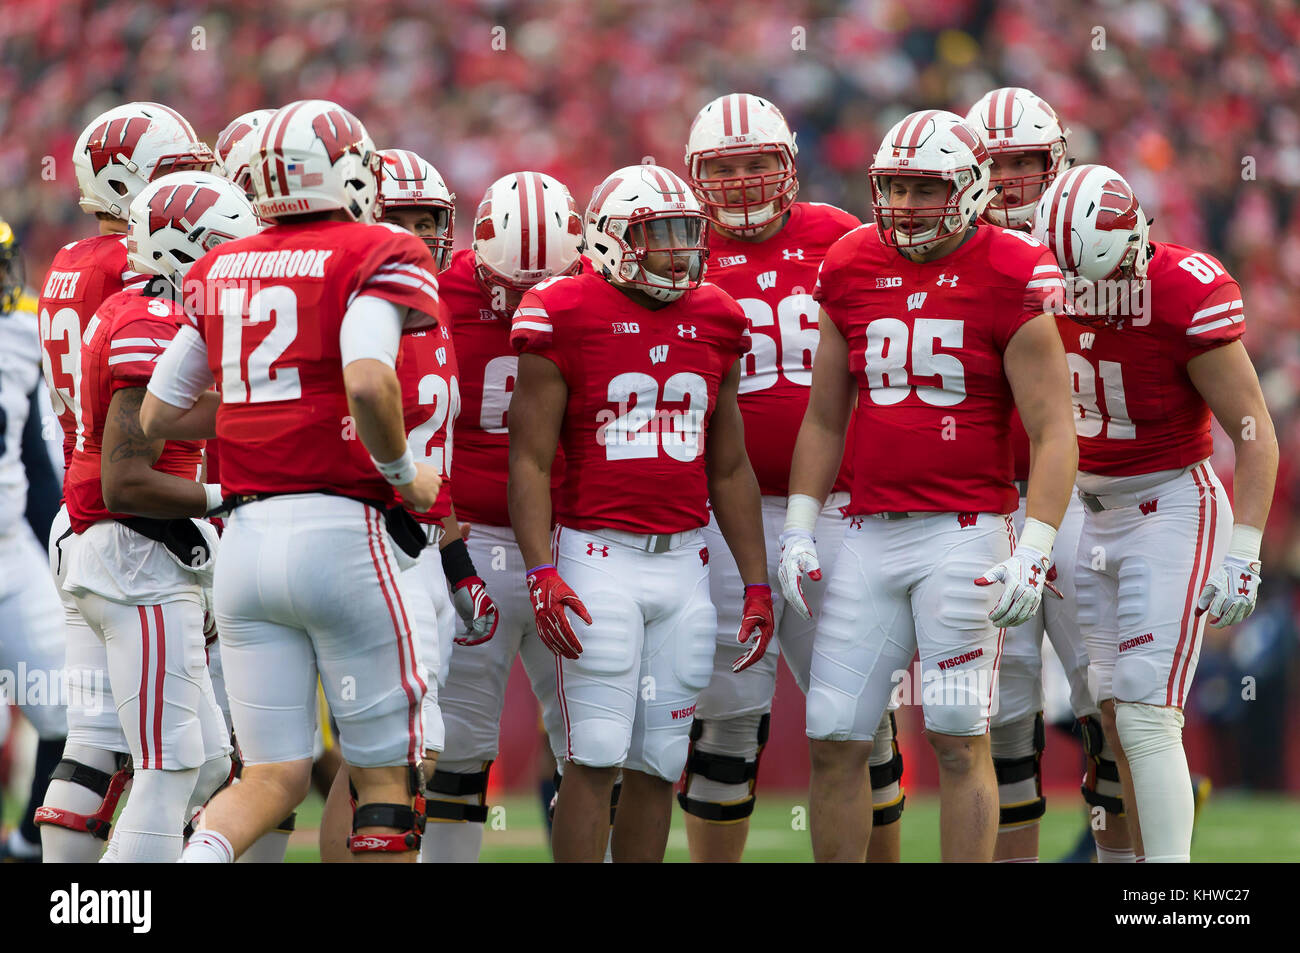 Madison, WI, USA. 18th Nov, 2017. Badger offense huddles up during the NCAA Football game between the Michigan Wolverines and the Wisconsin Badgers at Camp Randall Stadium in Madison, WI. Wisconsin defeated Michigan 24-10. John Fisher/CSM/Alamy Live News Stock Photo